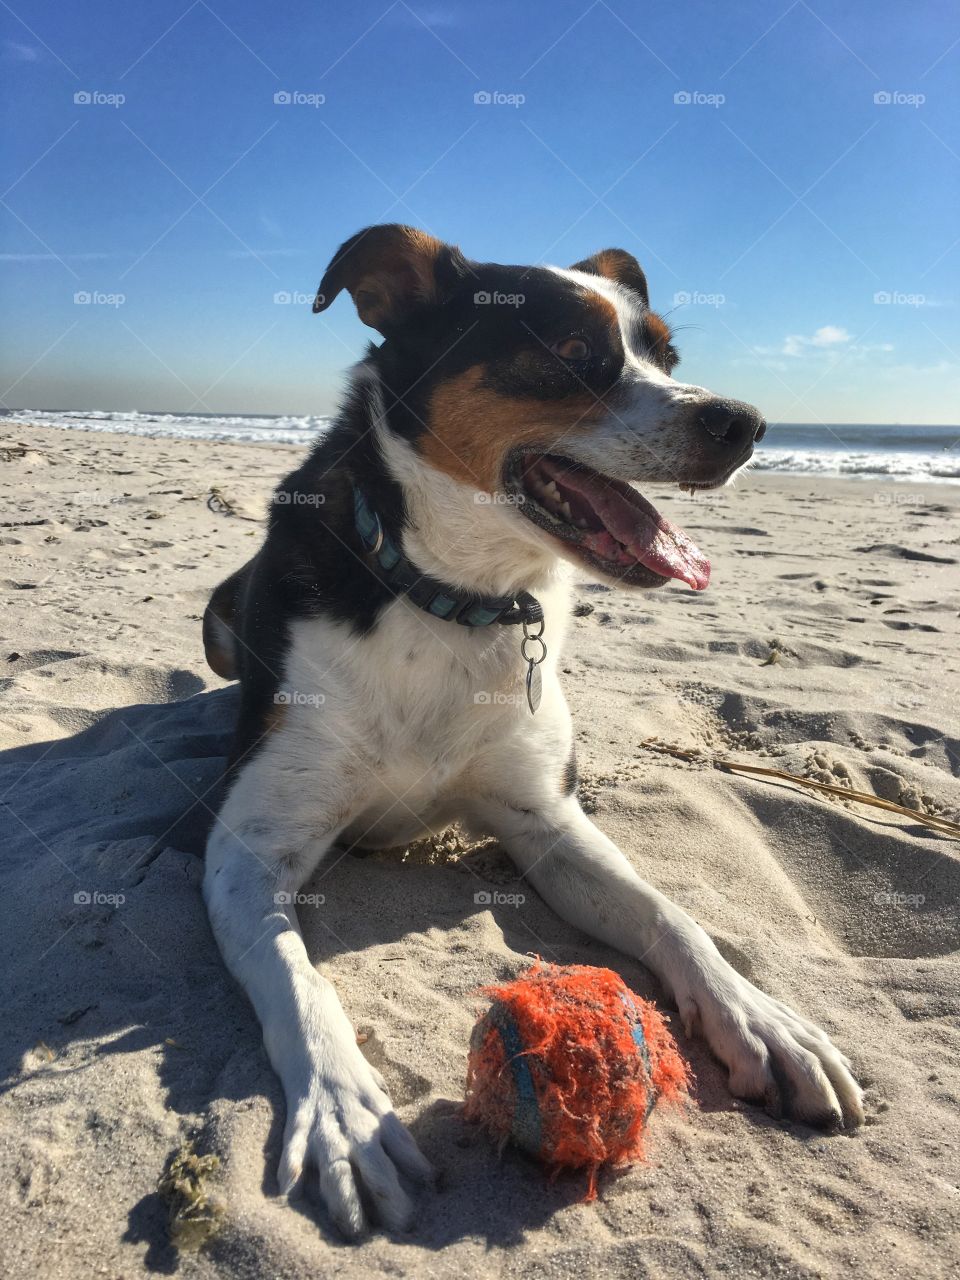 He took a break from playing fetch to lounge on the beach